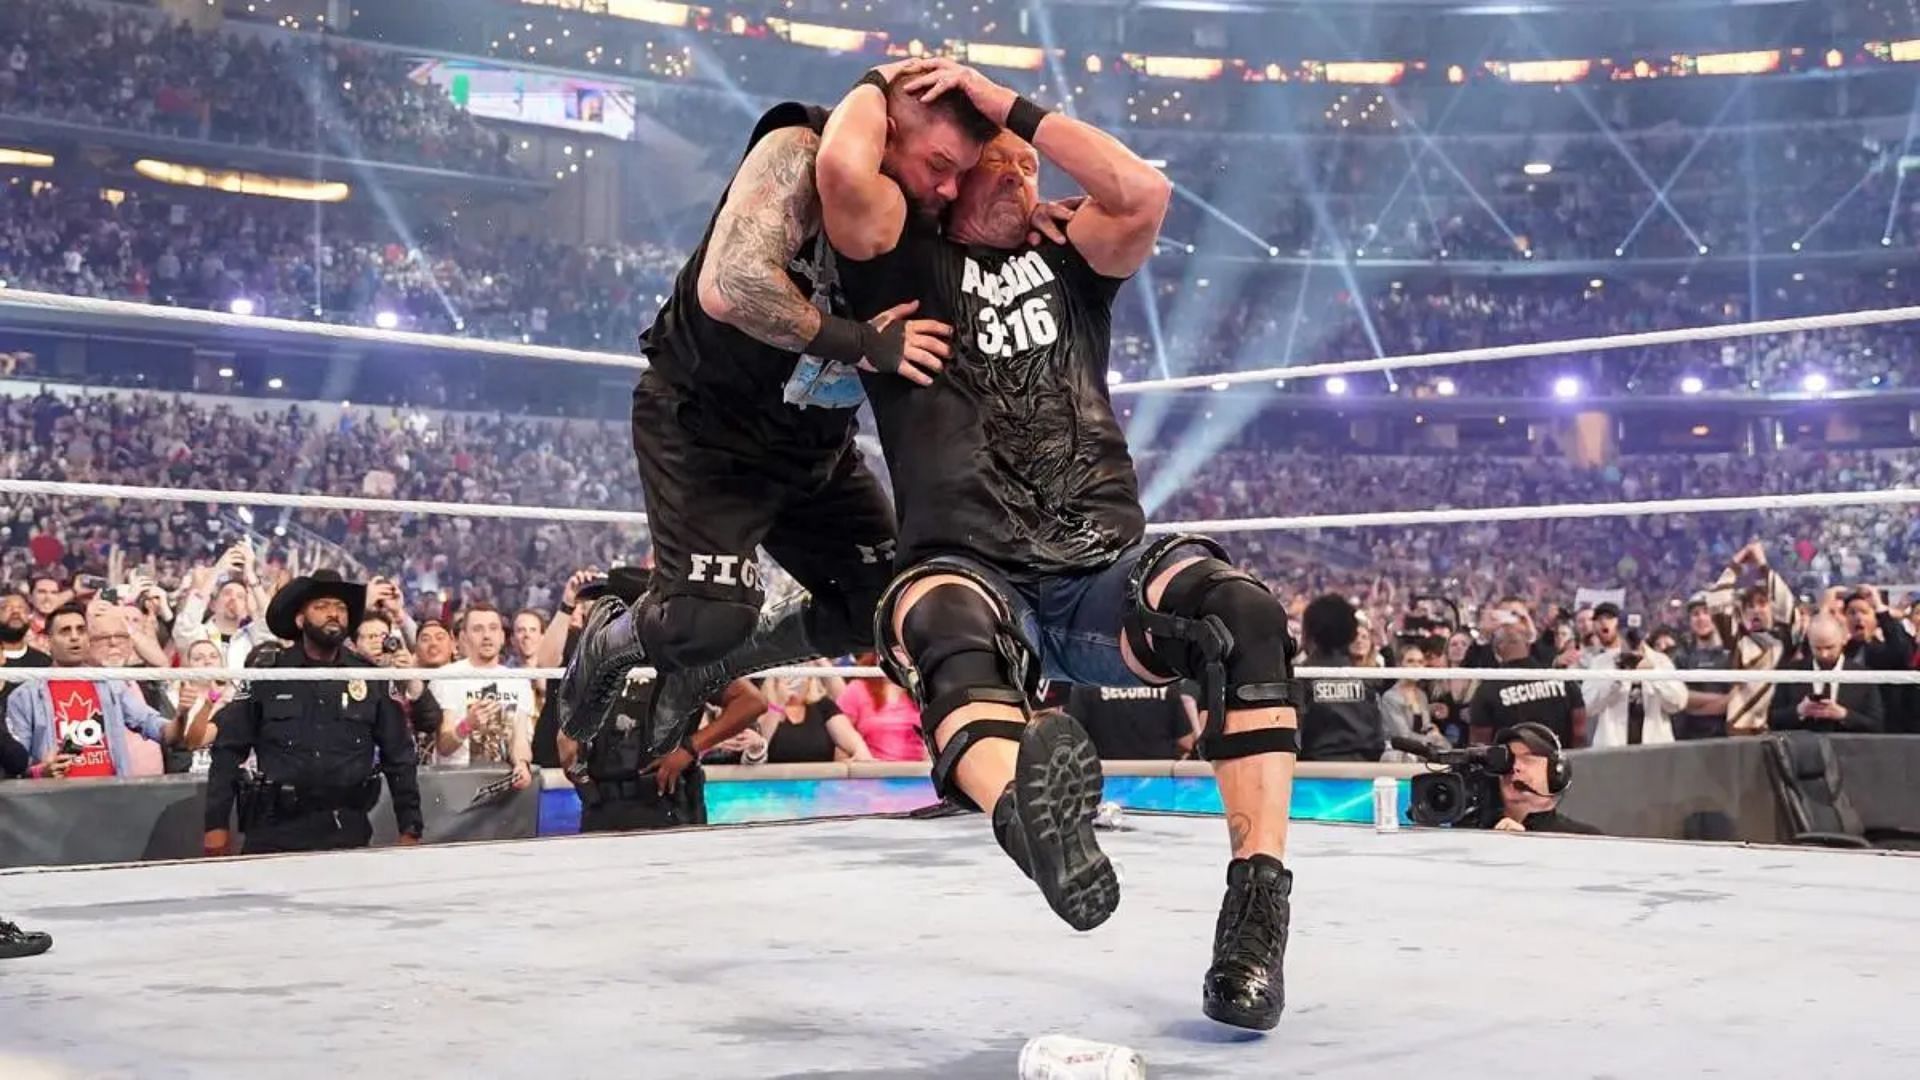 Stone Cold Steve Austin delivered a perfect stunner to Kevin Owens